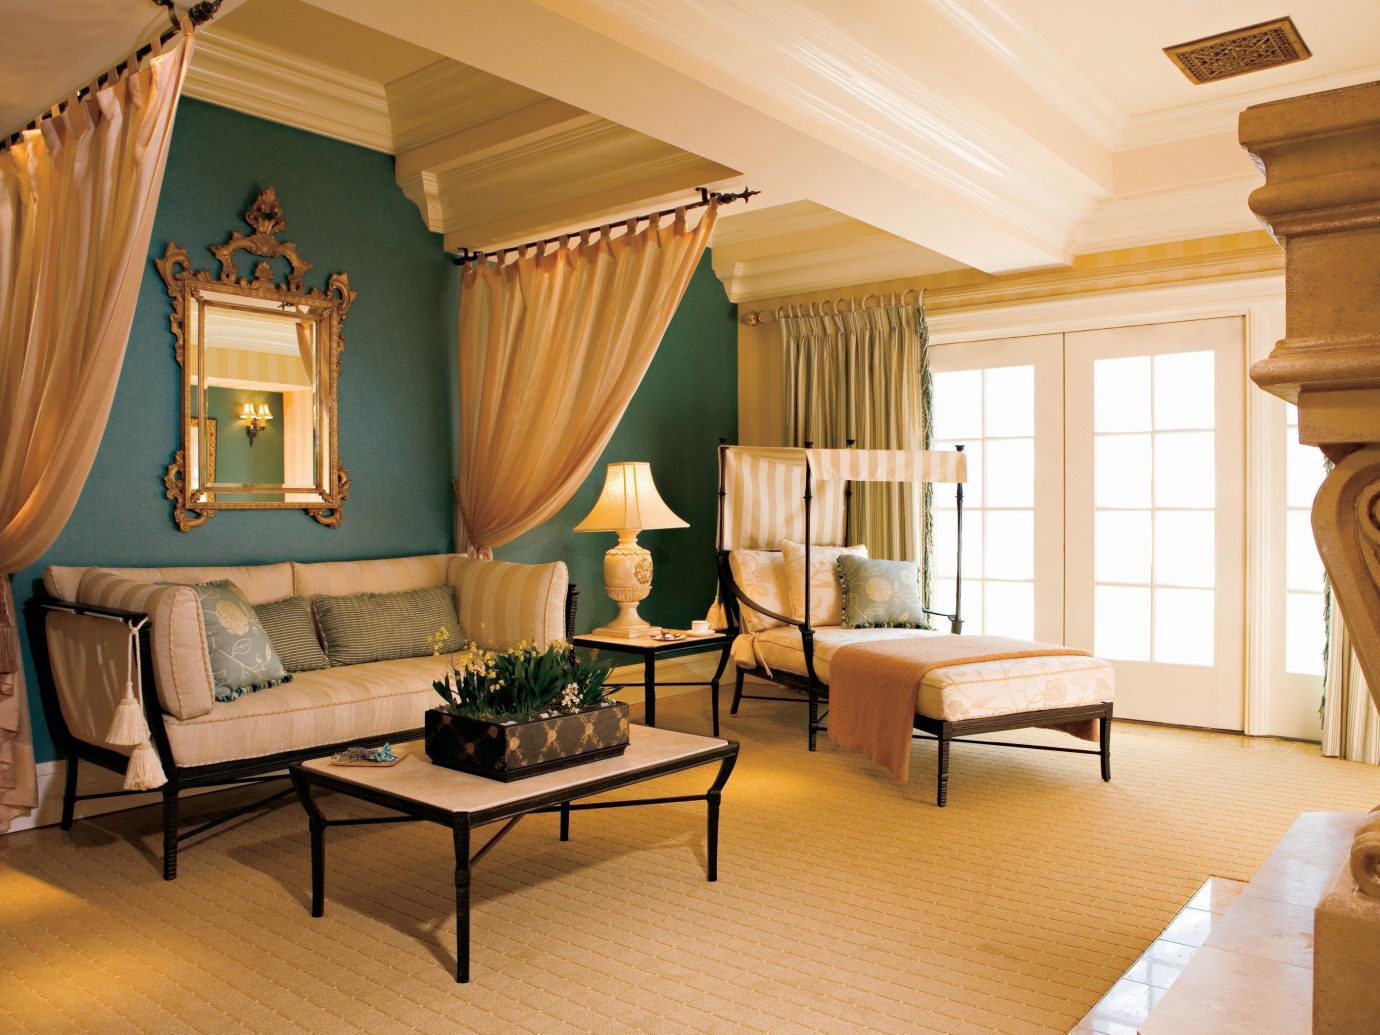 Living Room At Fairmont Grand Del Mar In San Diego, Ca, Usa